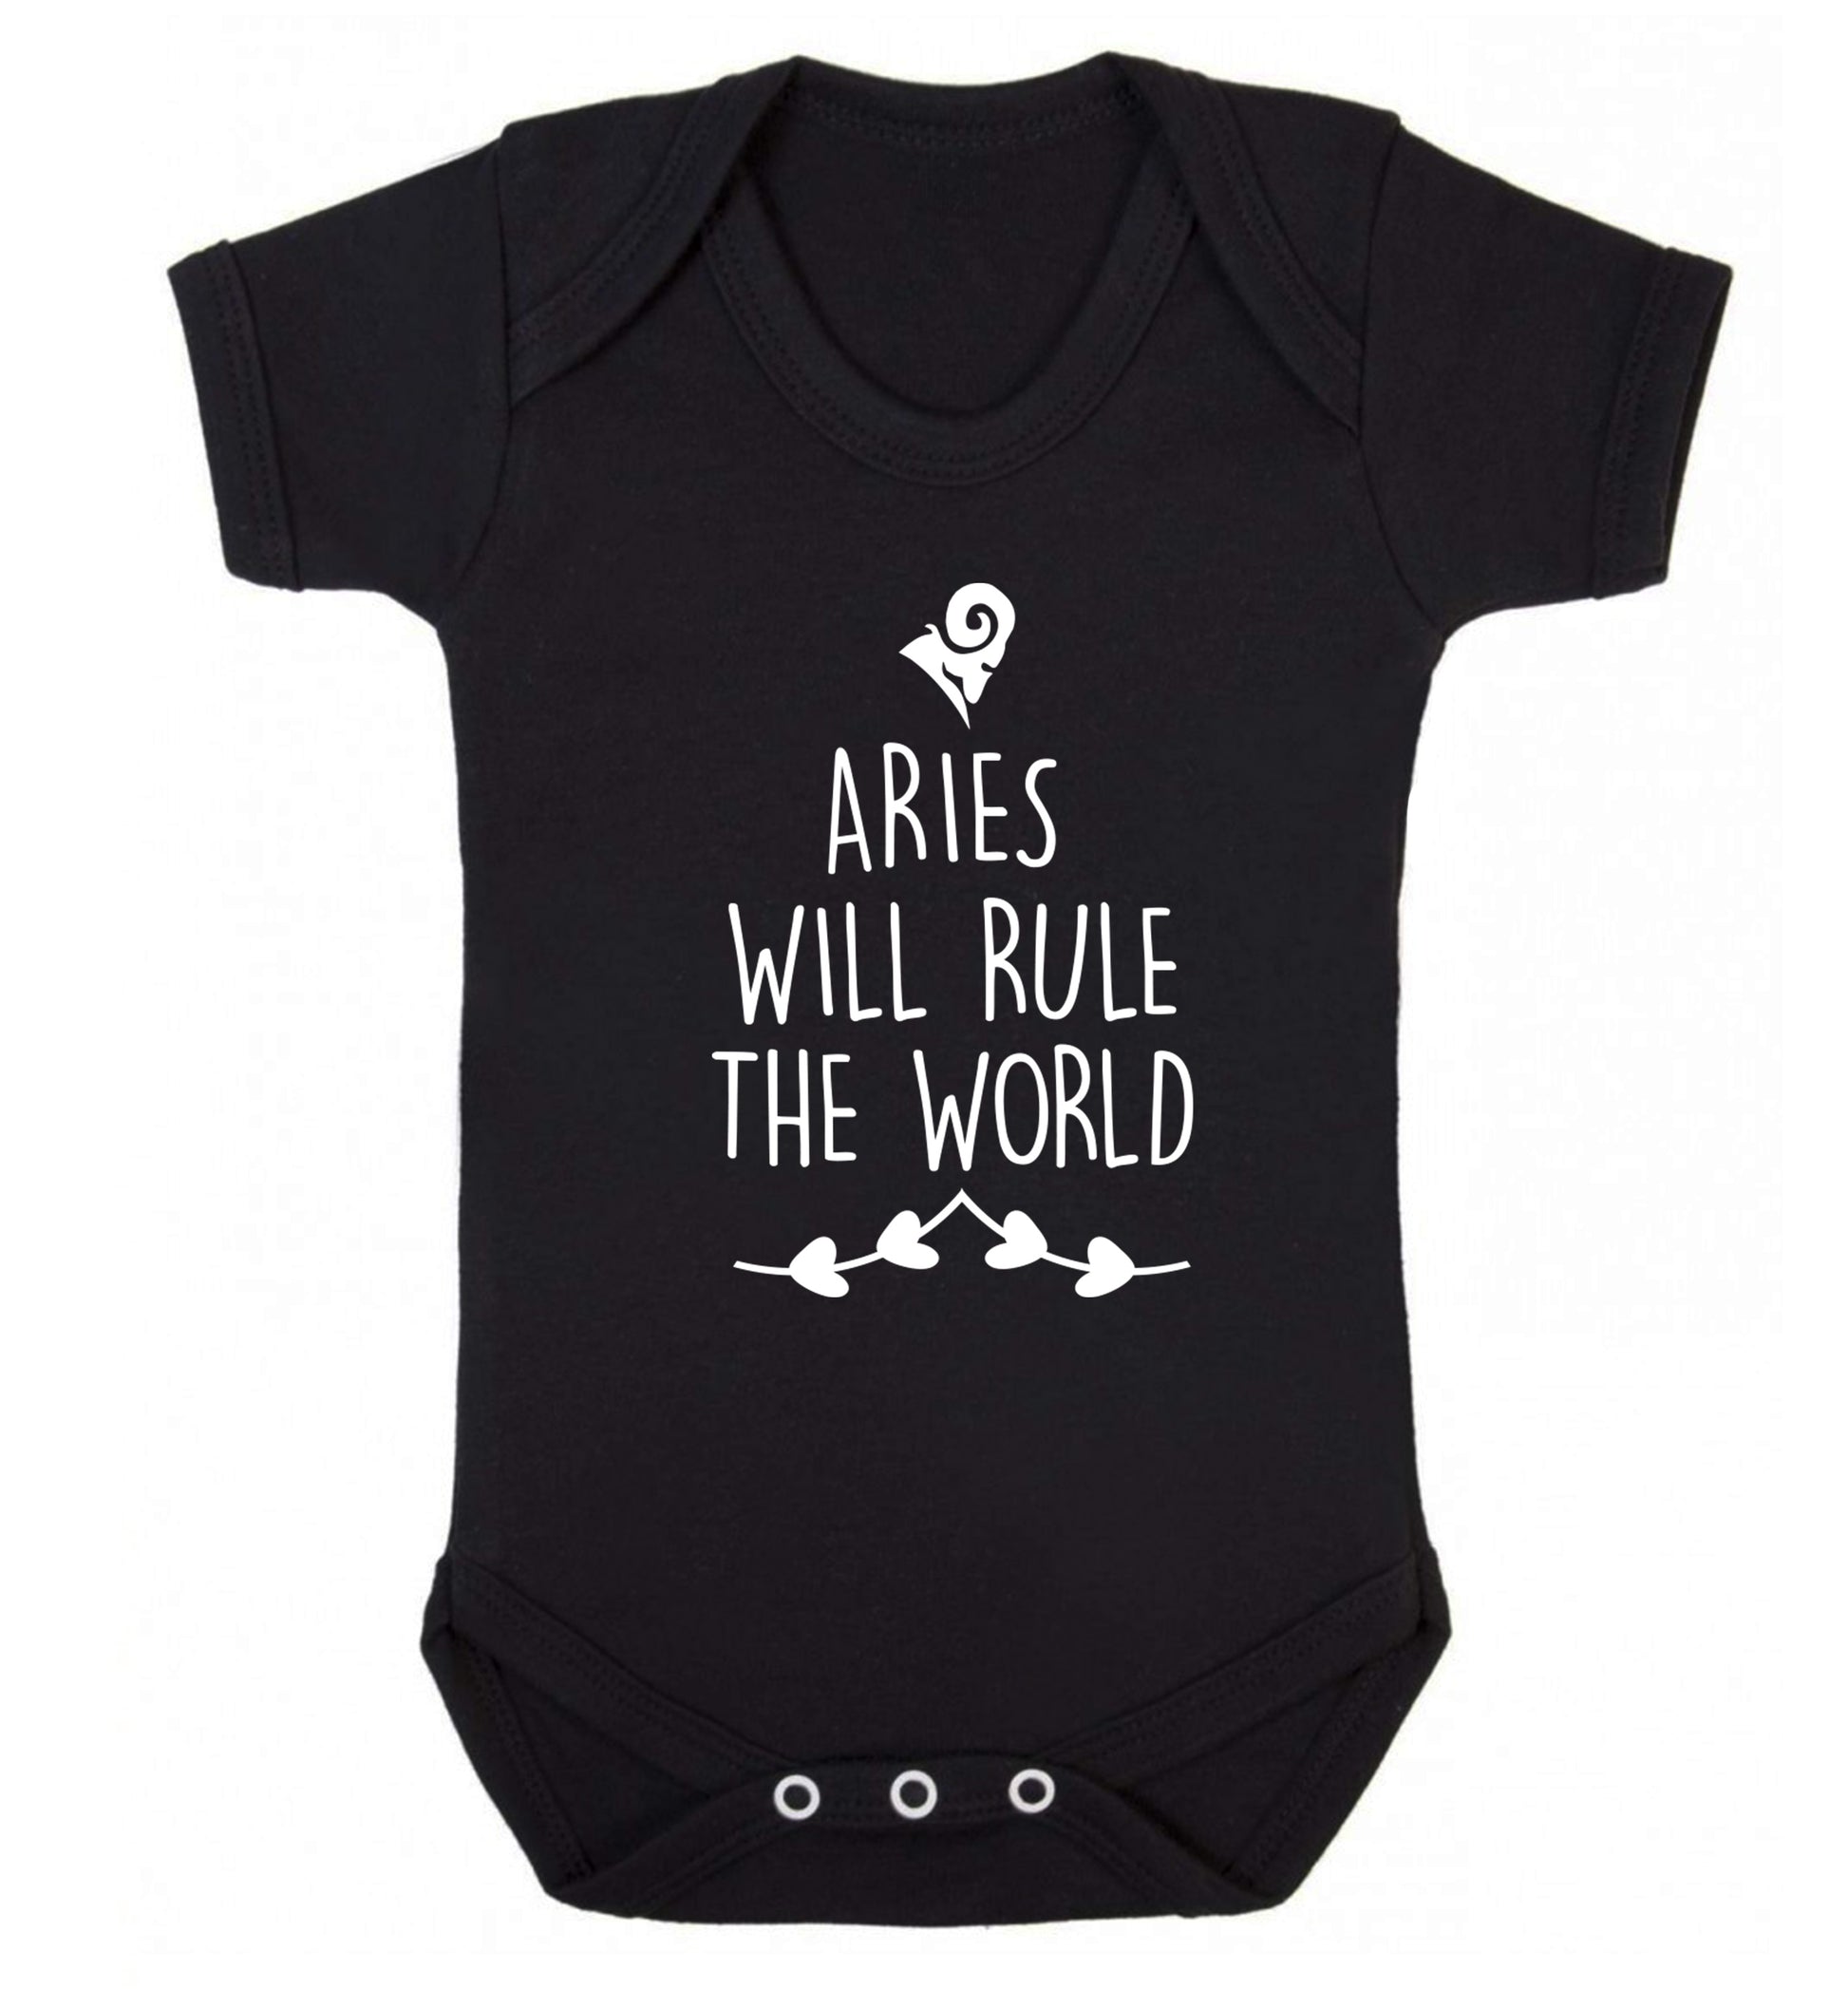 Aries will rule the world Baby Vest black 18-24 months